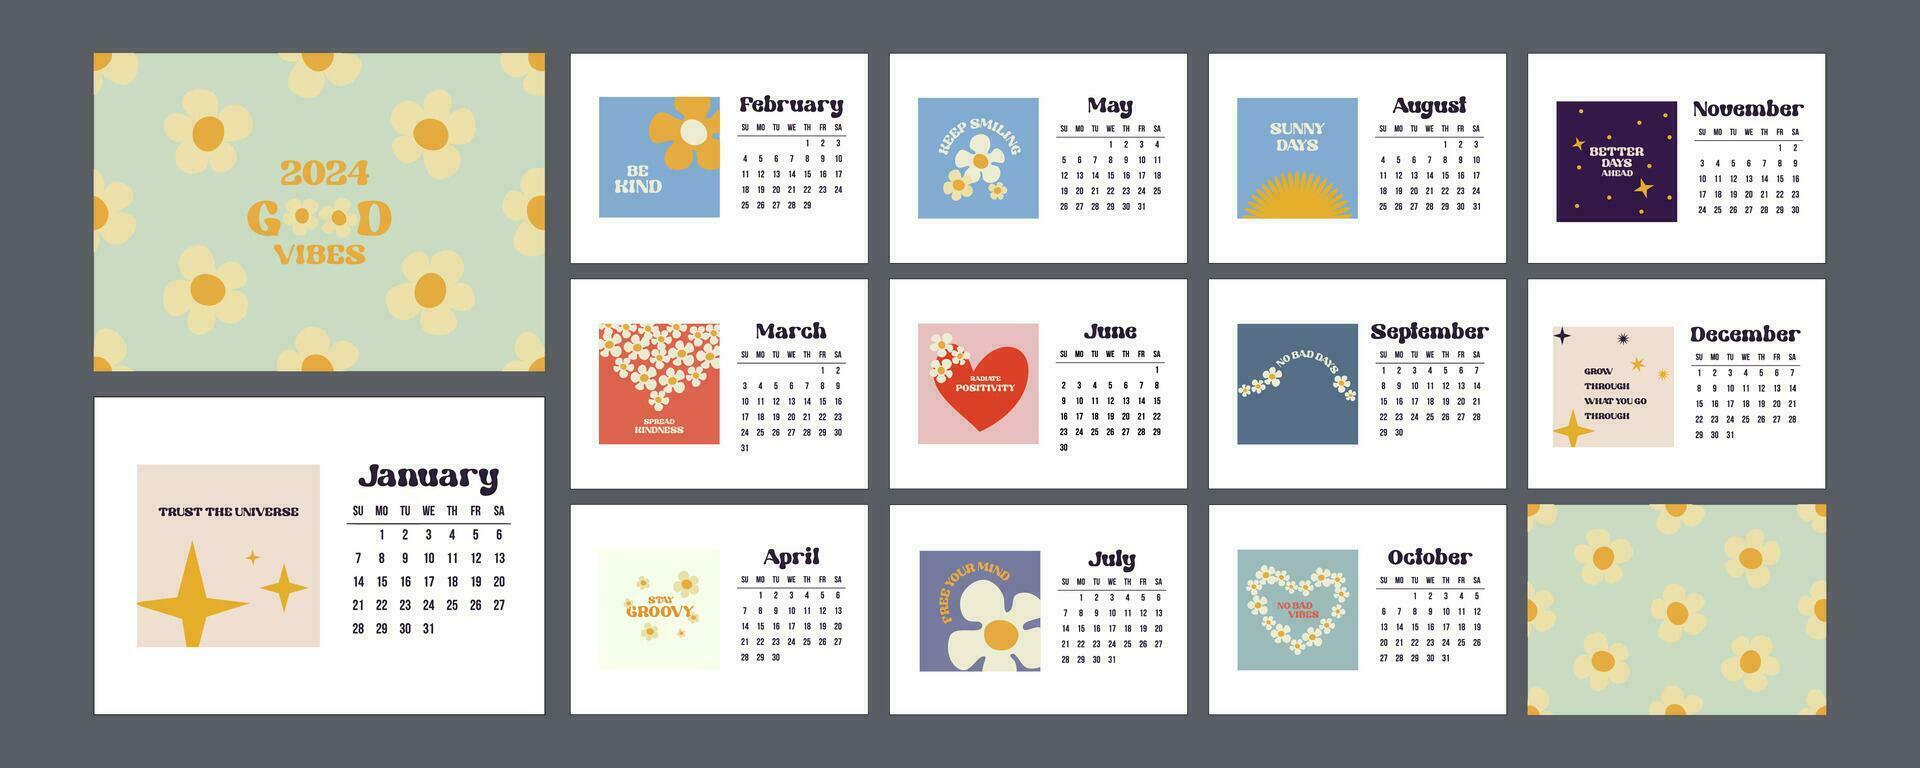 Calendar 2024 template design in Groovy retro style with positive motivation vector